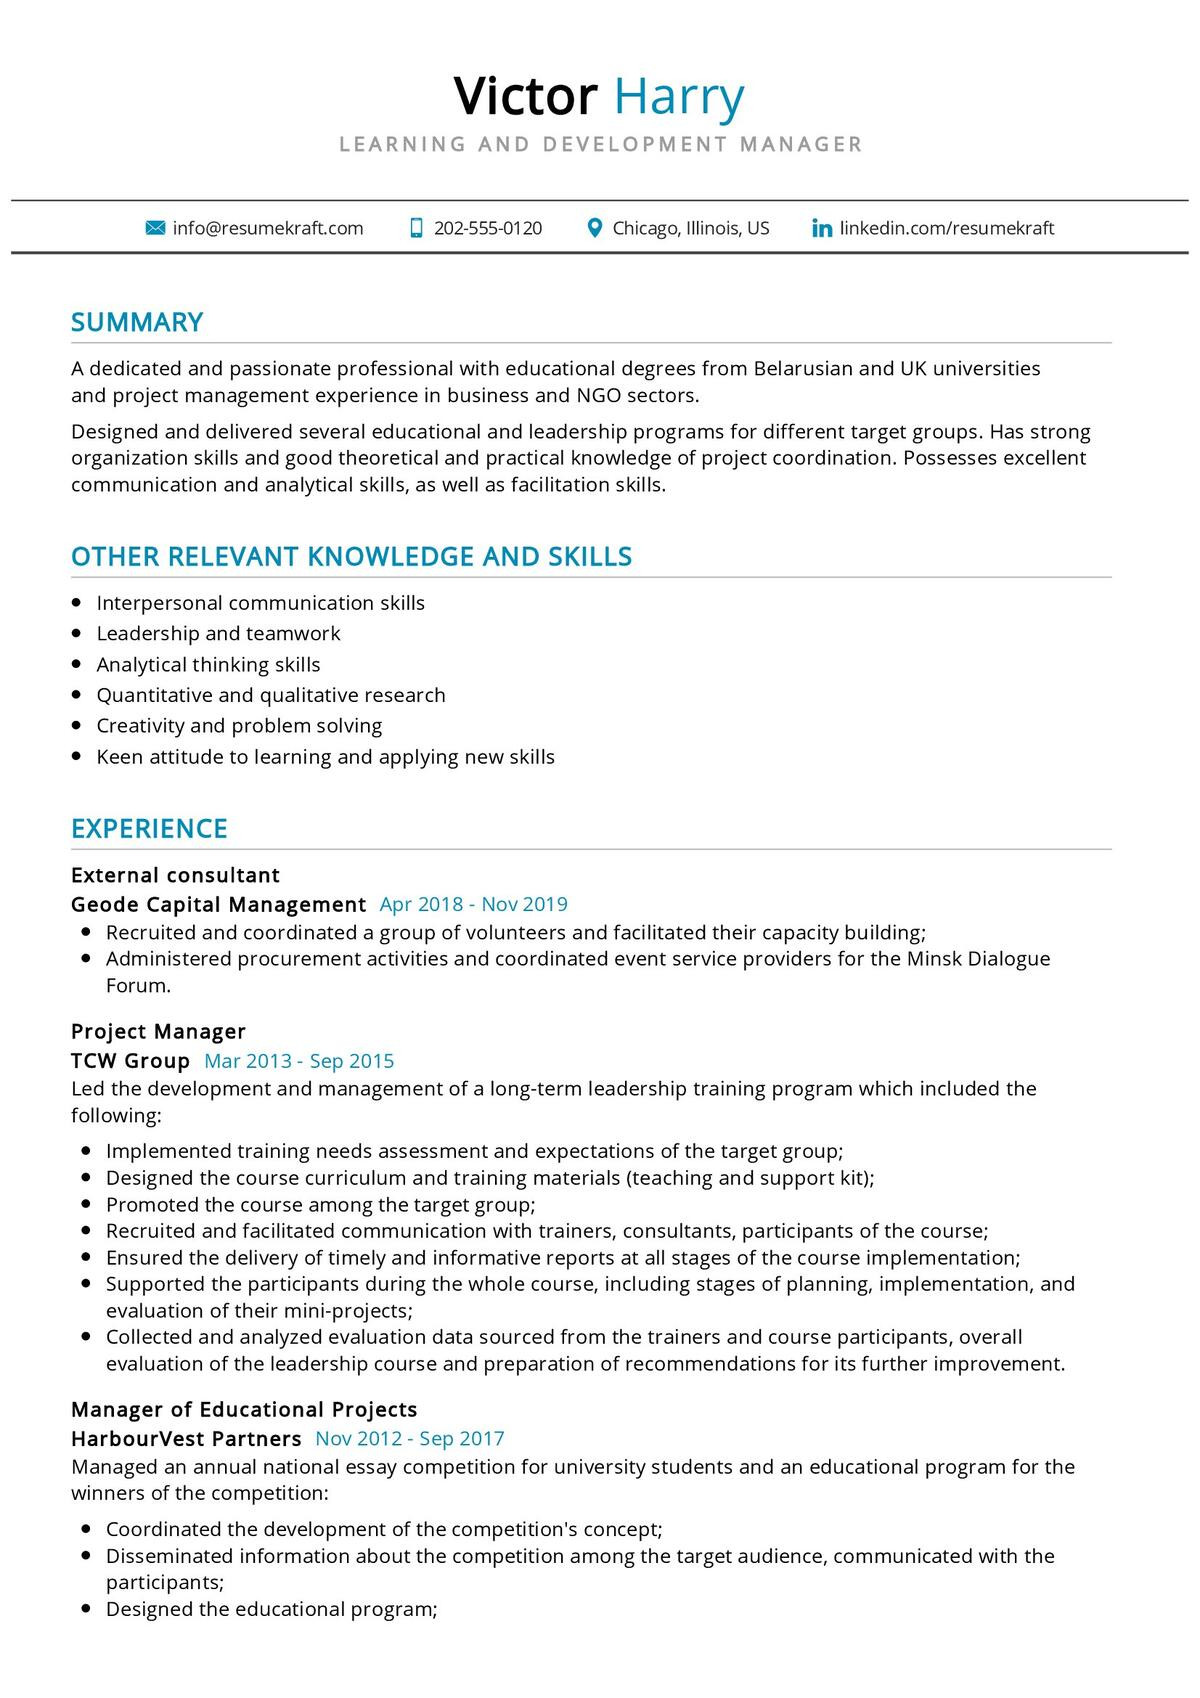 Learning and Development Manager Resume Sample Learning and Development Manager Resume 2021 Writing Guide …